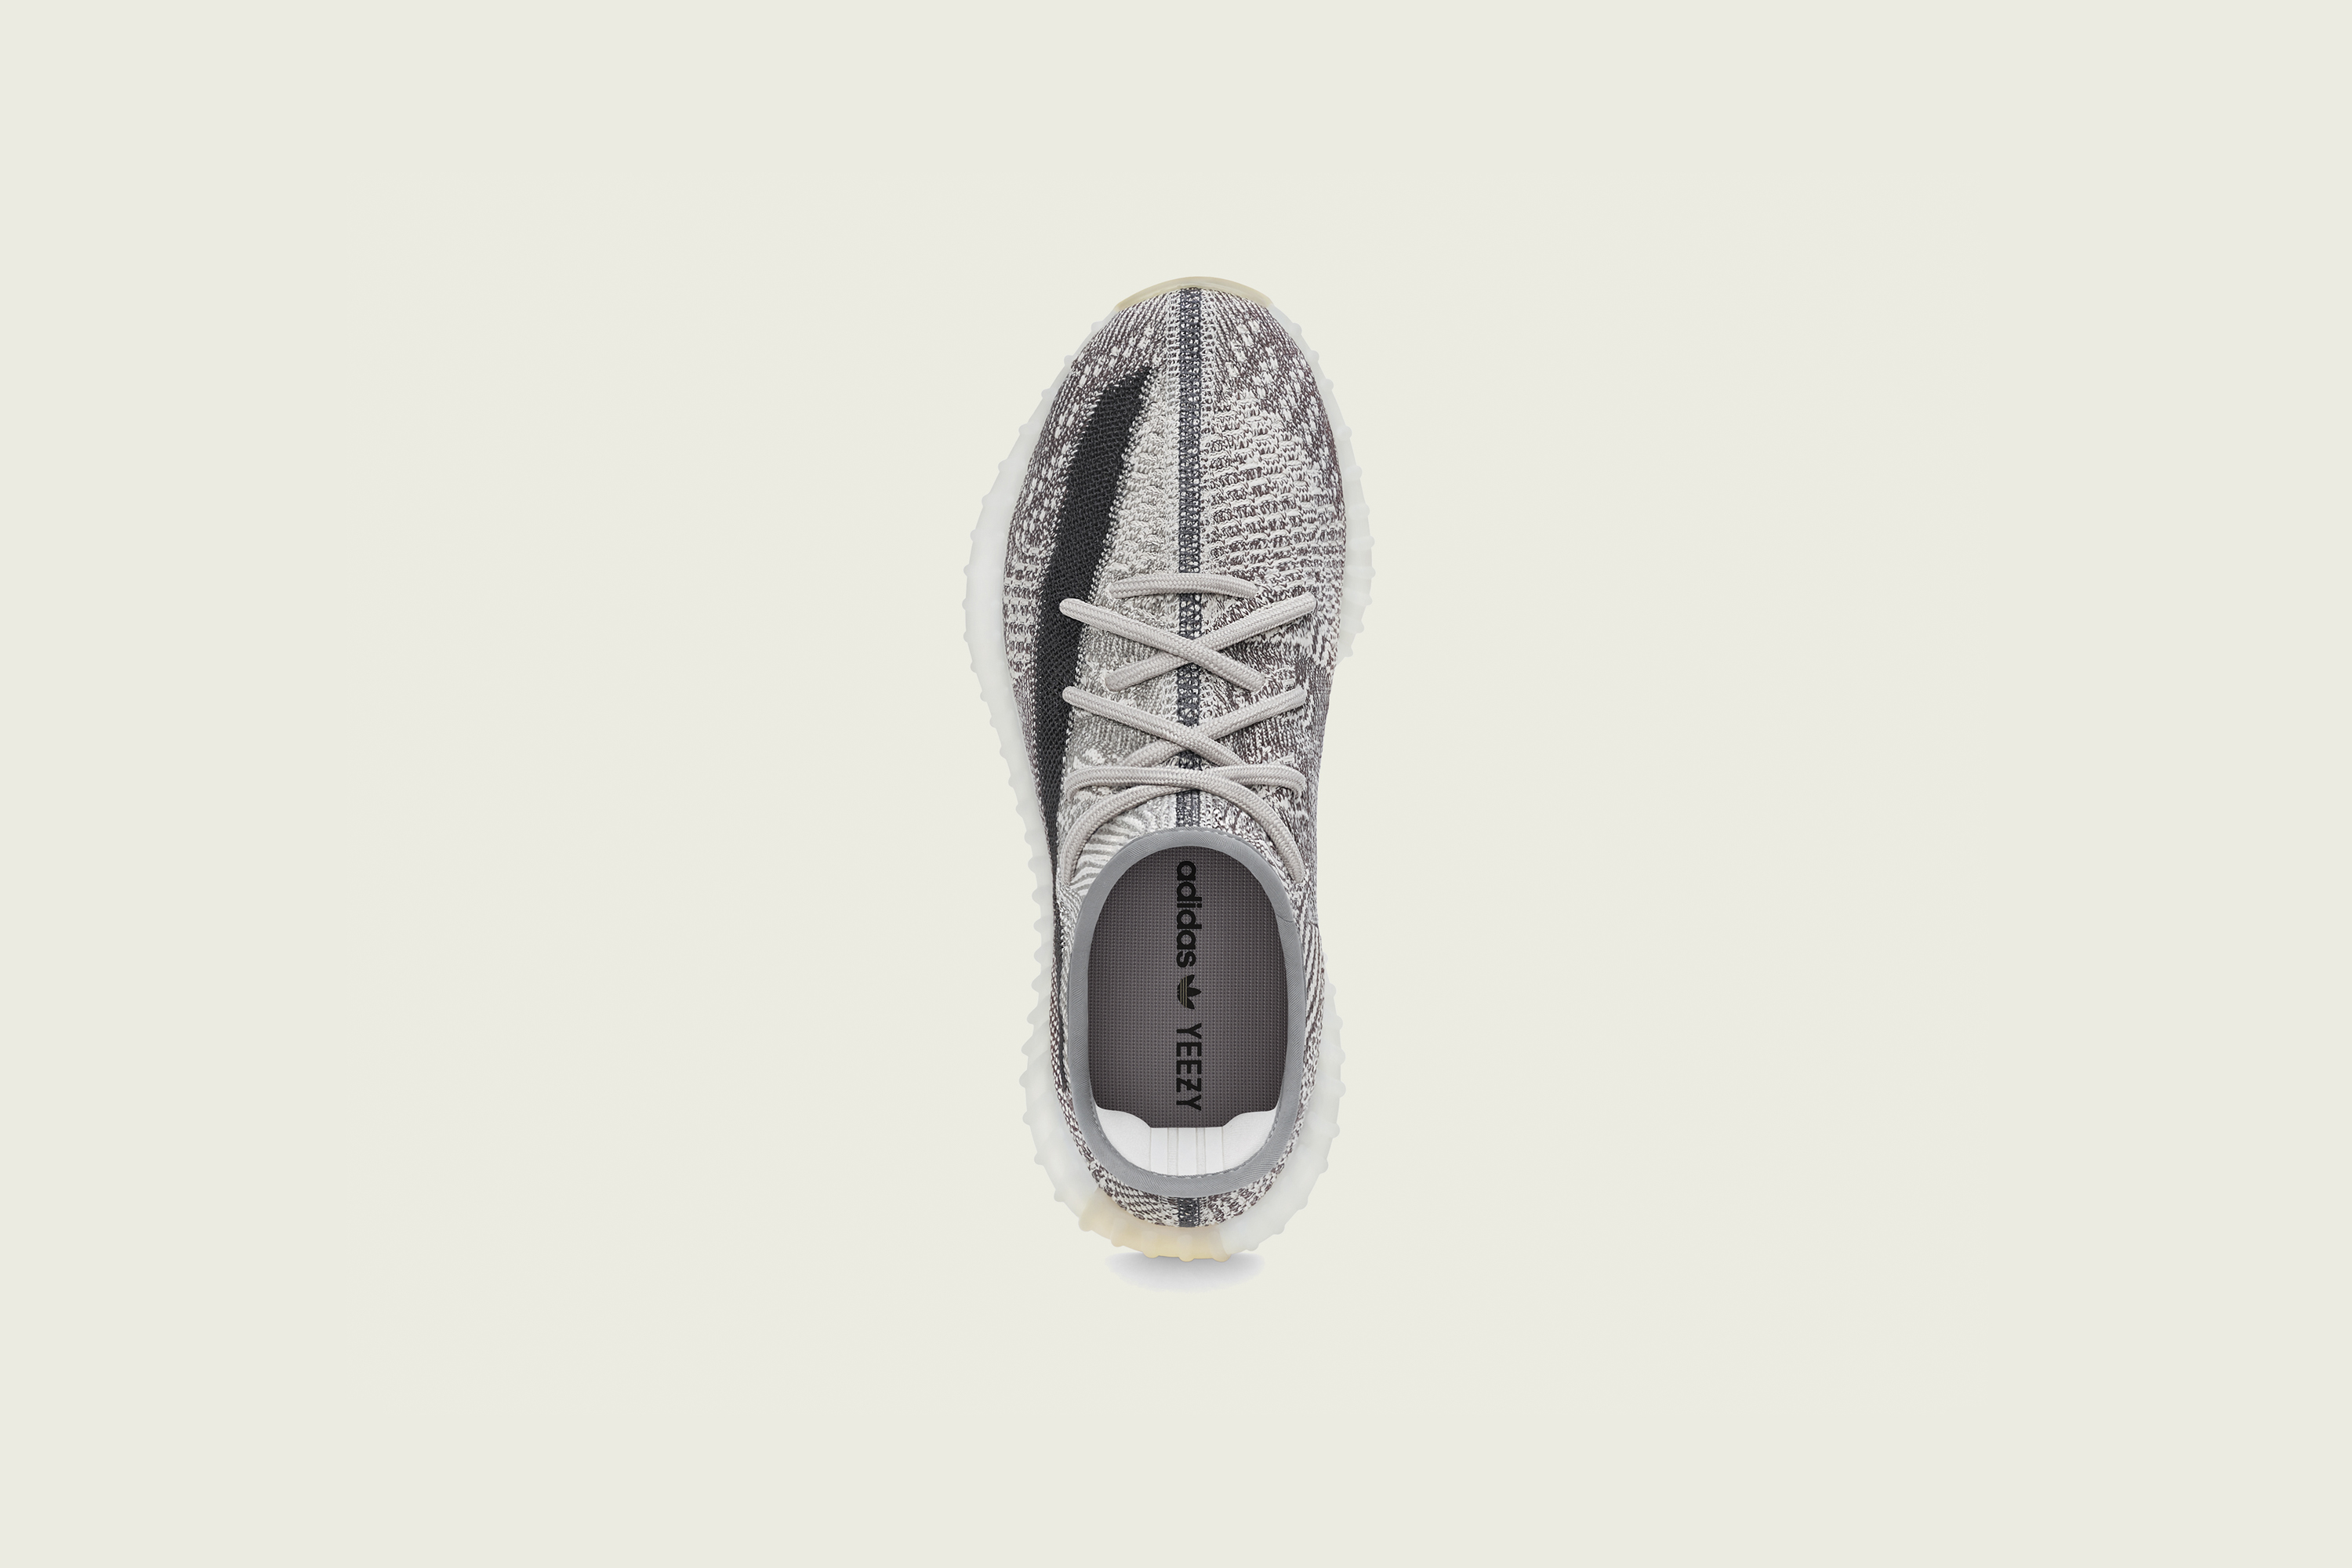 adidas Originals Yeezy Boost 350V2 'Zyon' Raffle– Up There